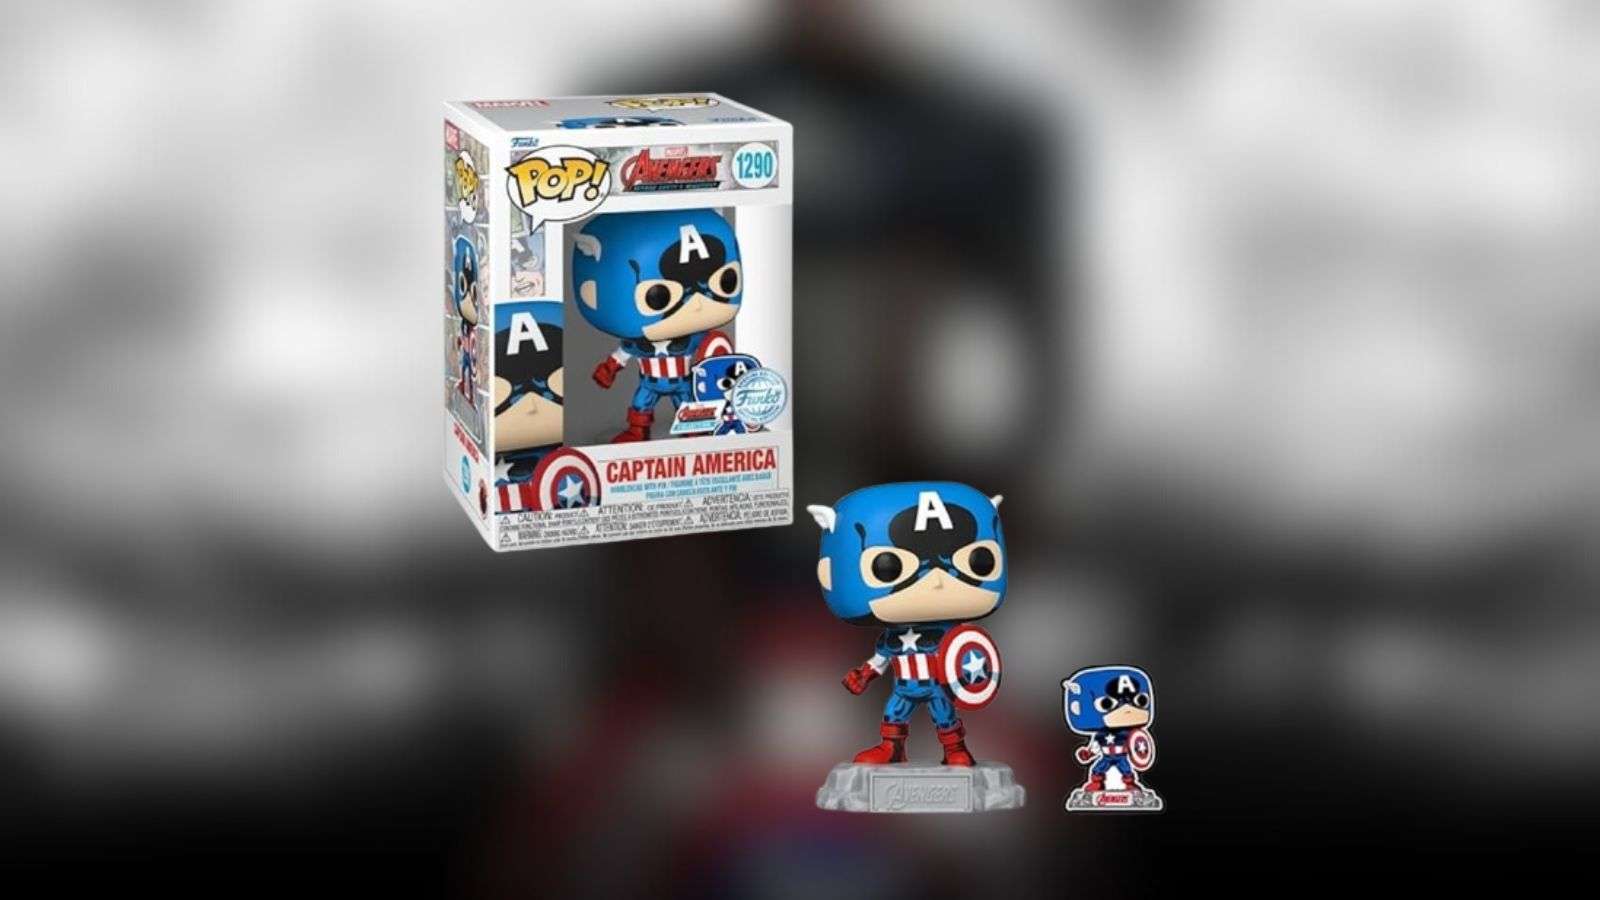 Captain America Funko Pop & Pin assembles with nearly 40% off - Dexerto